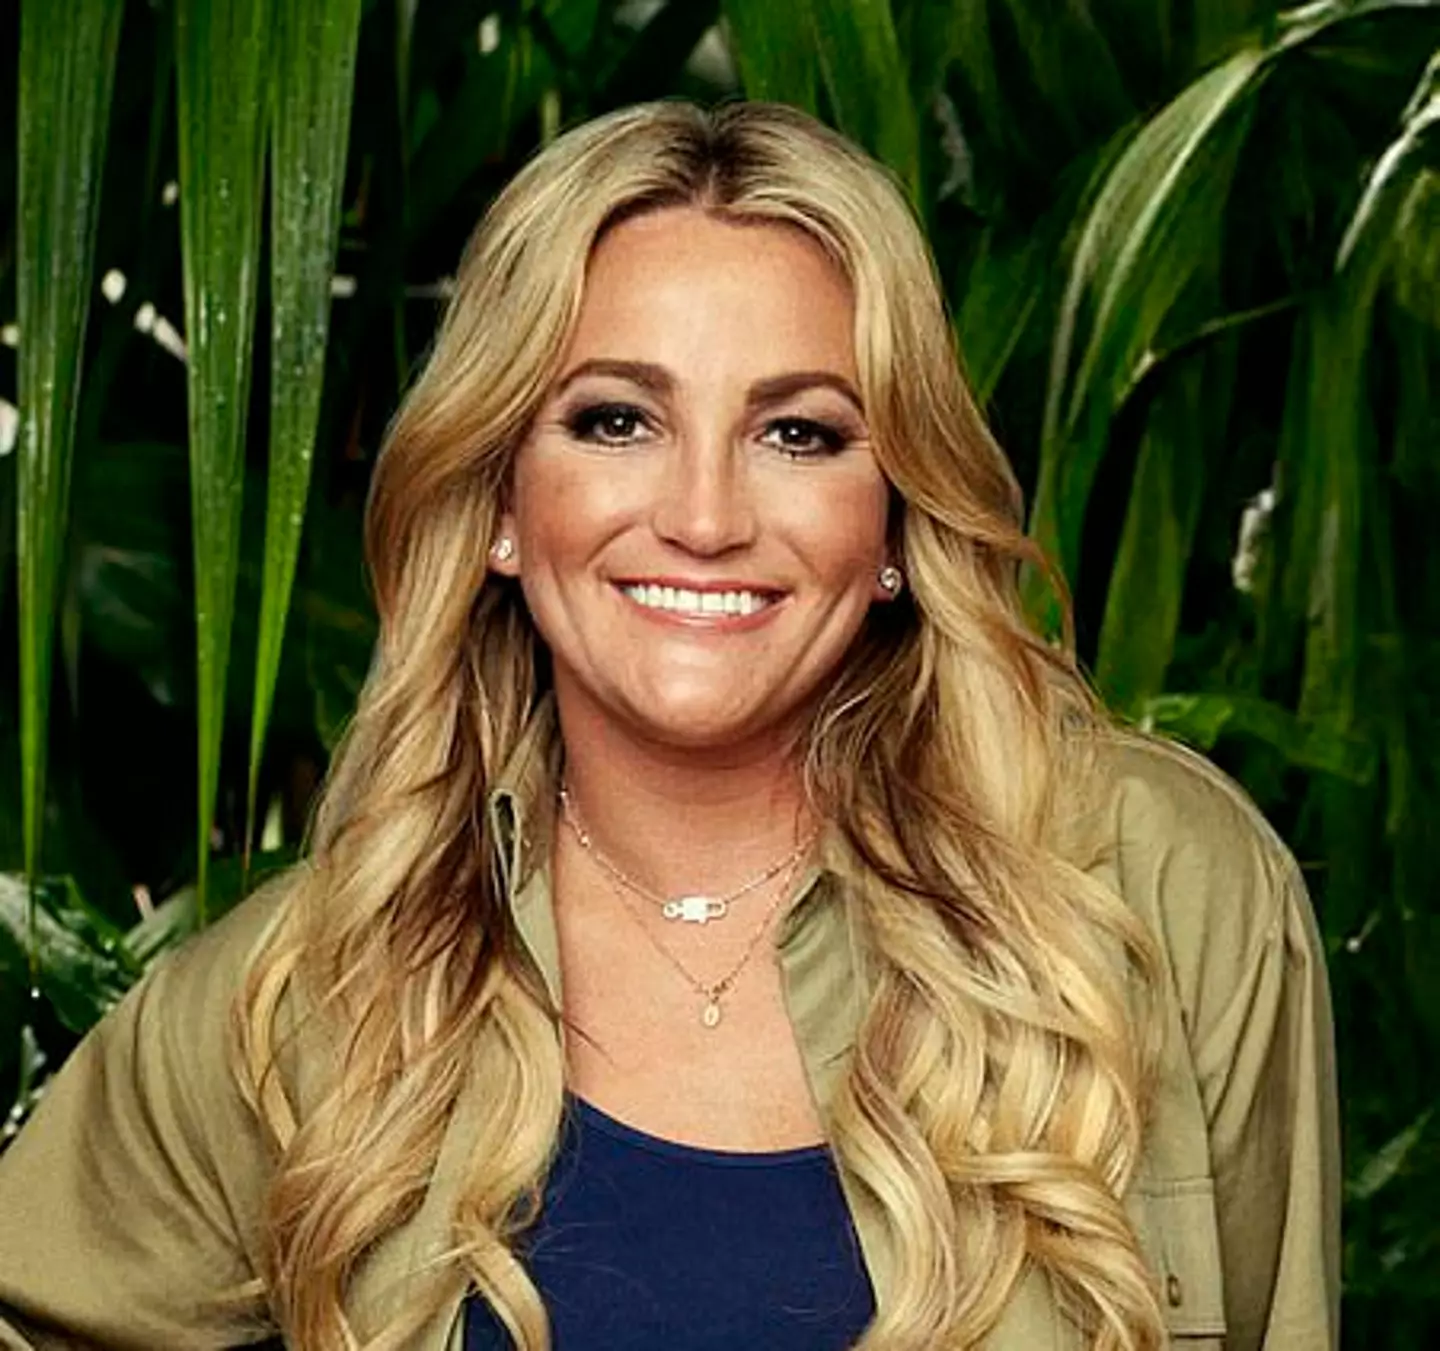 I’m A Celeb viewers are stunned after discovering how old Jamie Lynn Spears actually is.